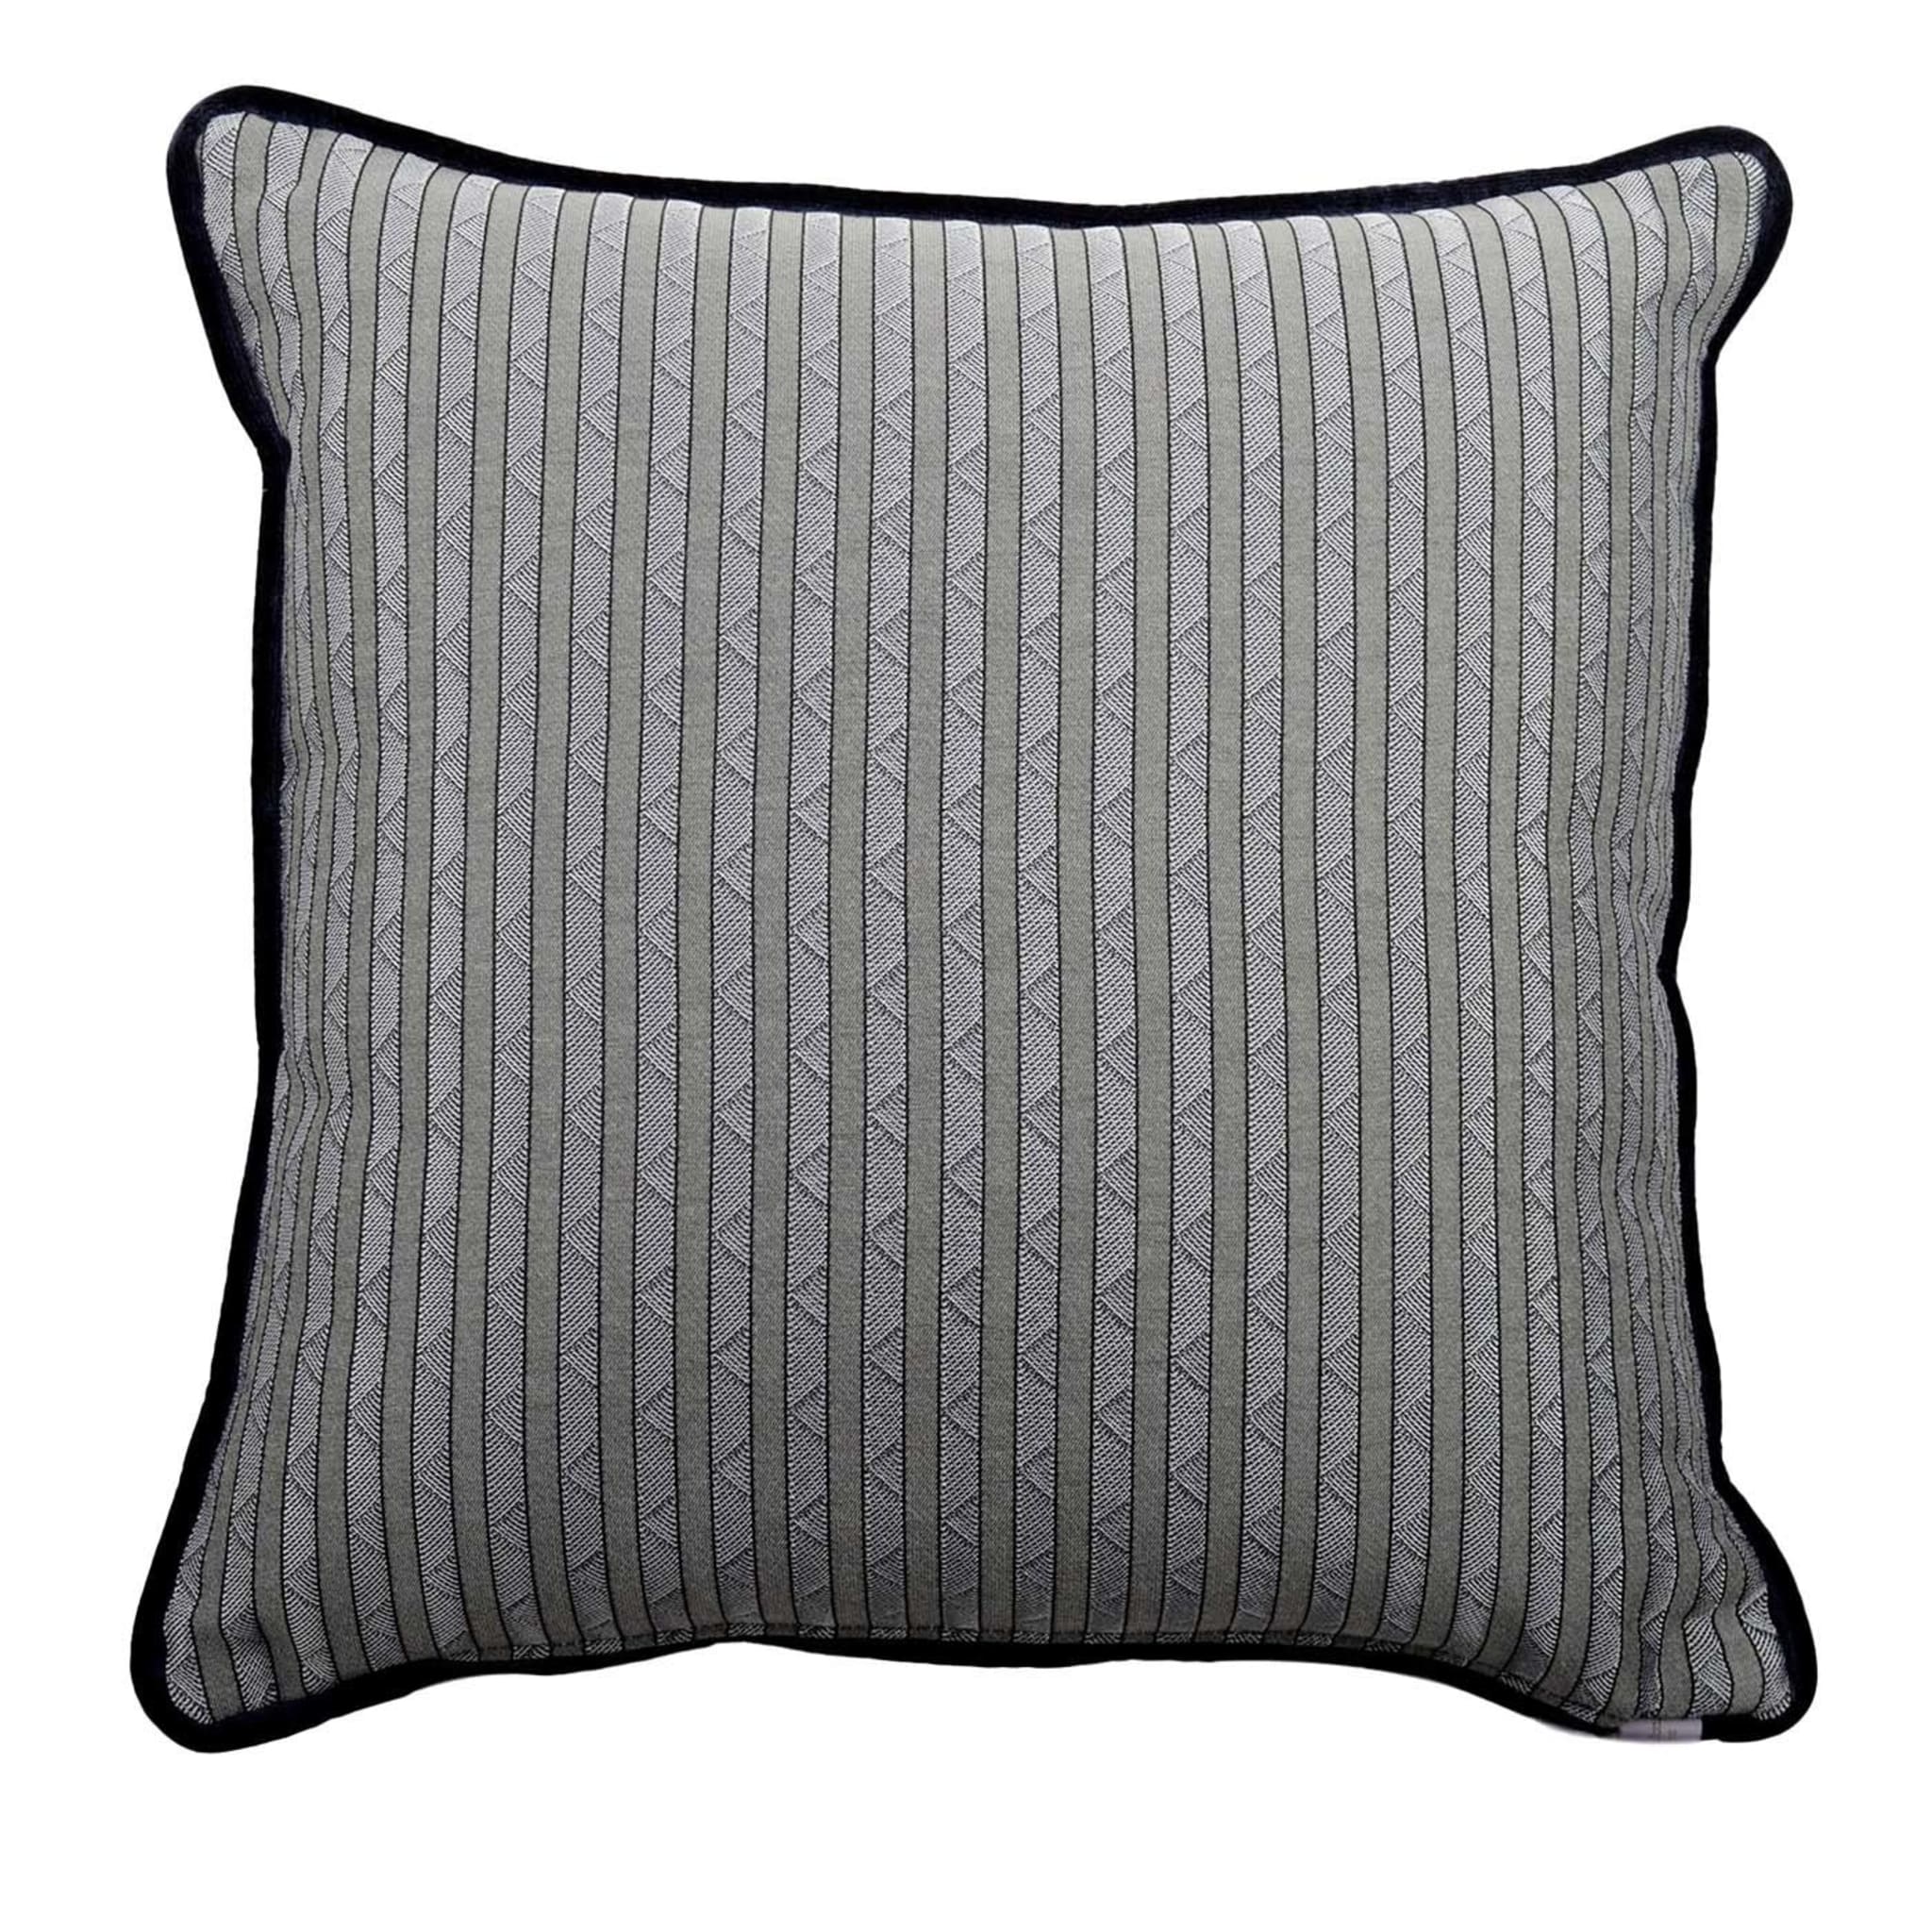 Square Carré Cushion in striped jacquard fabric - Main view